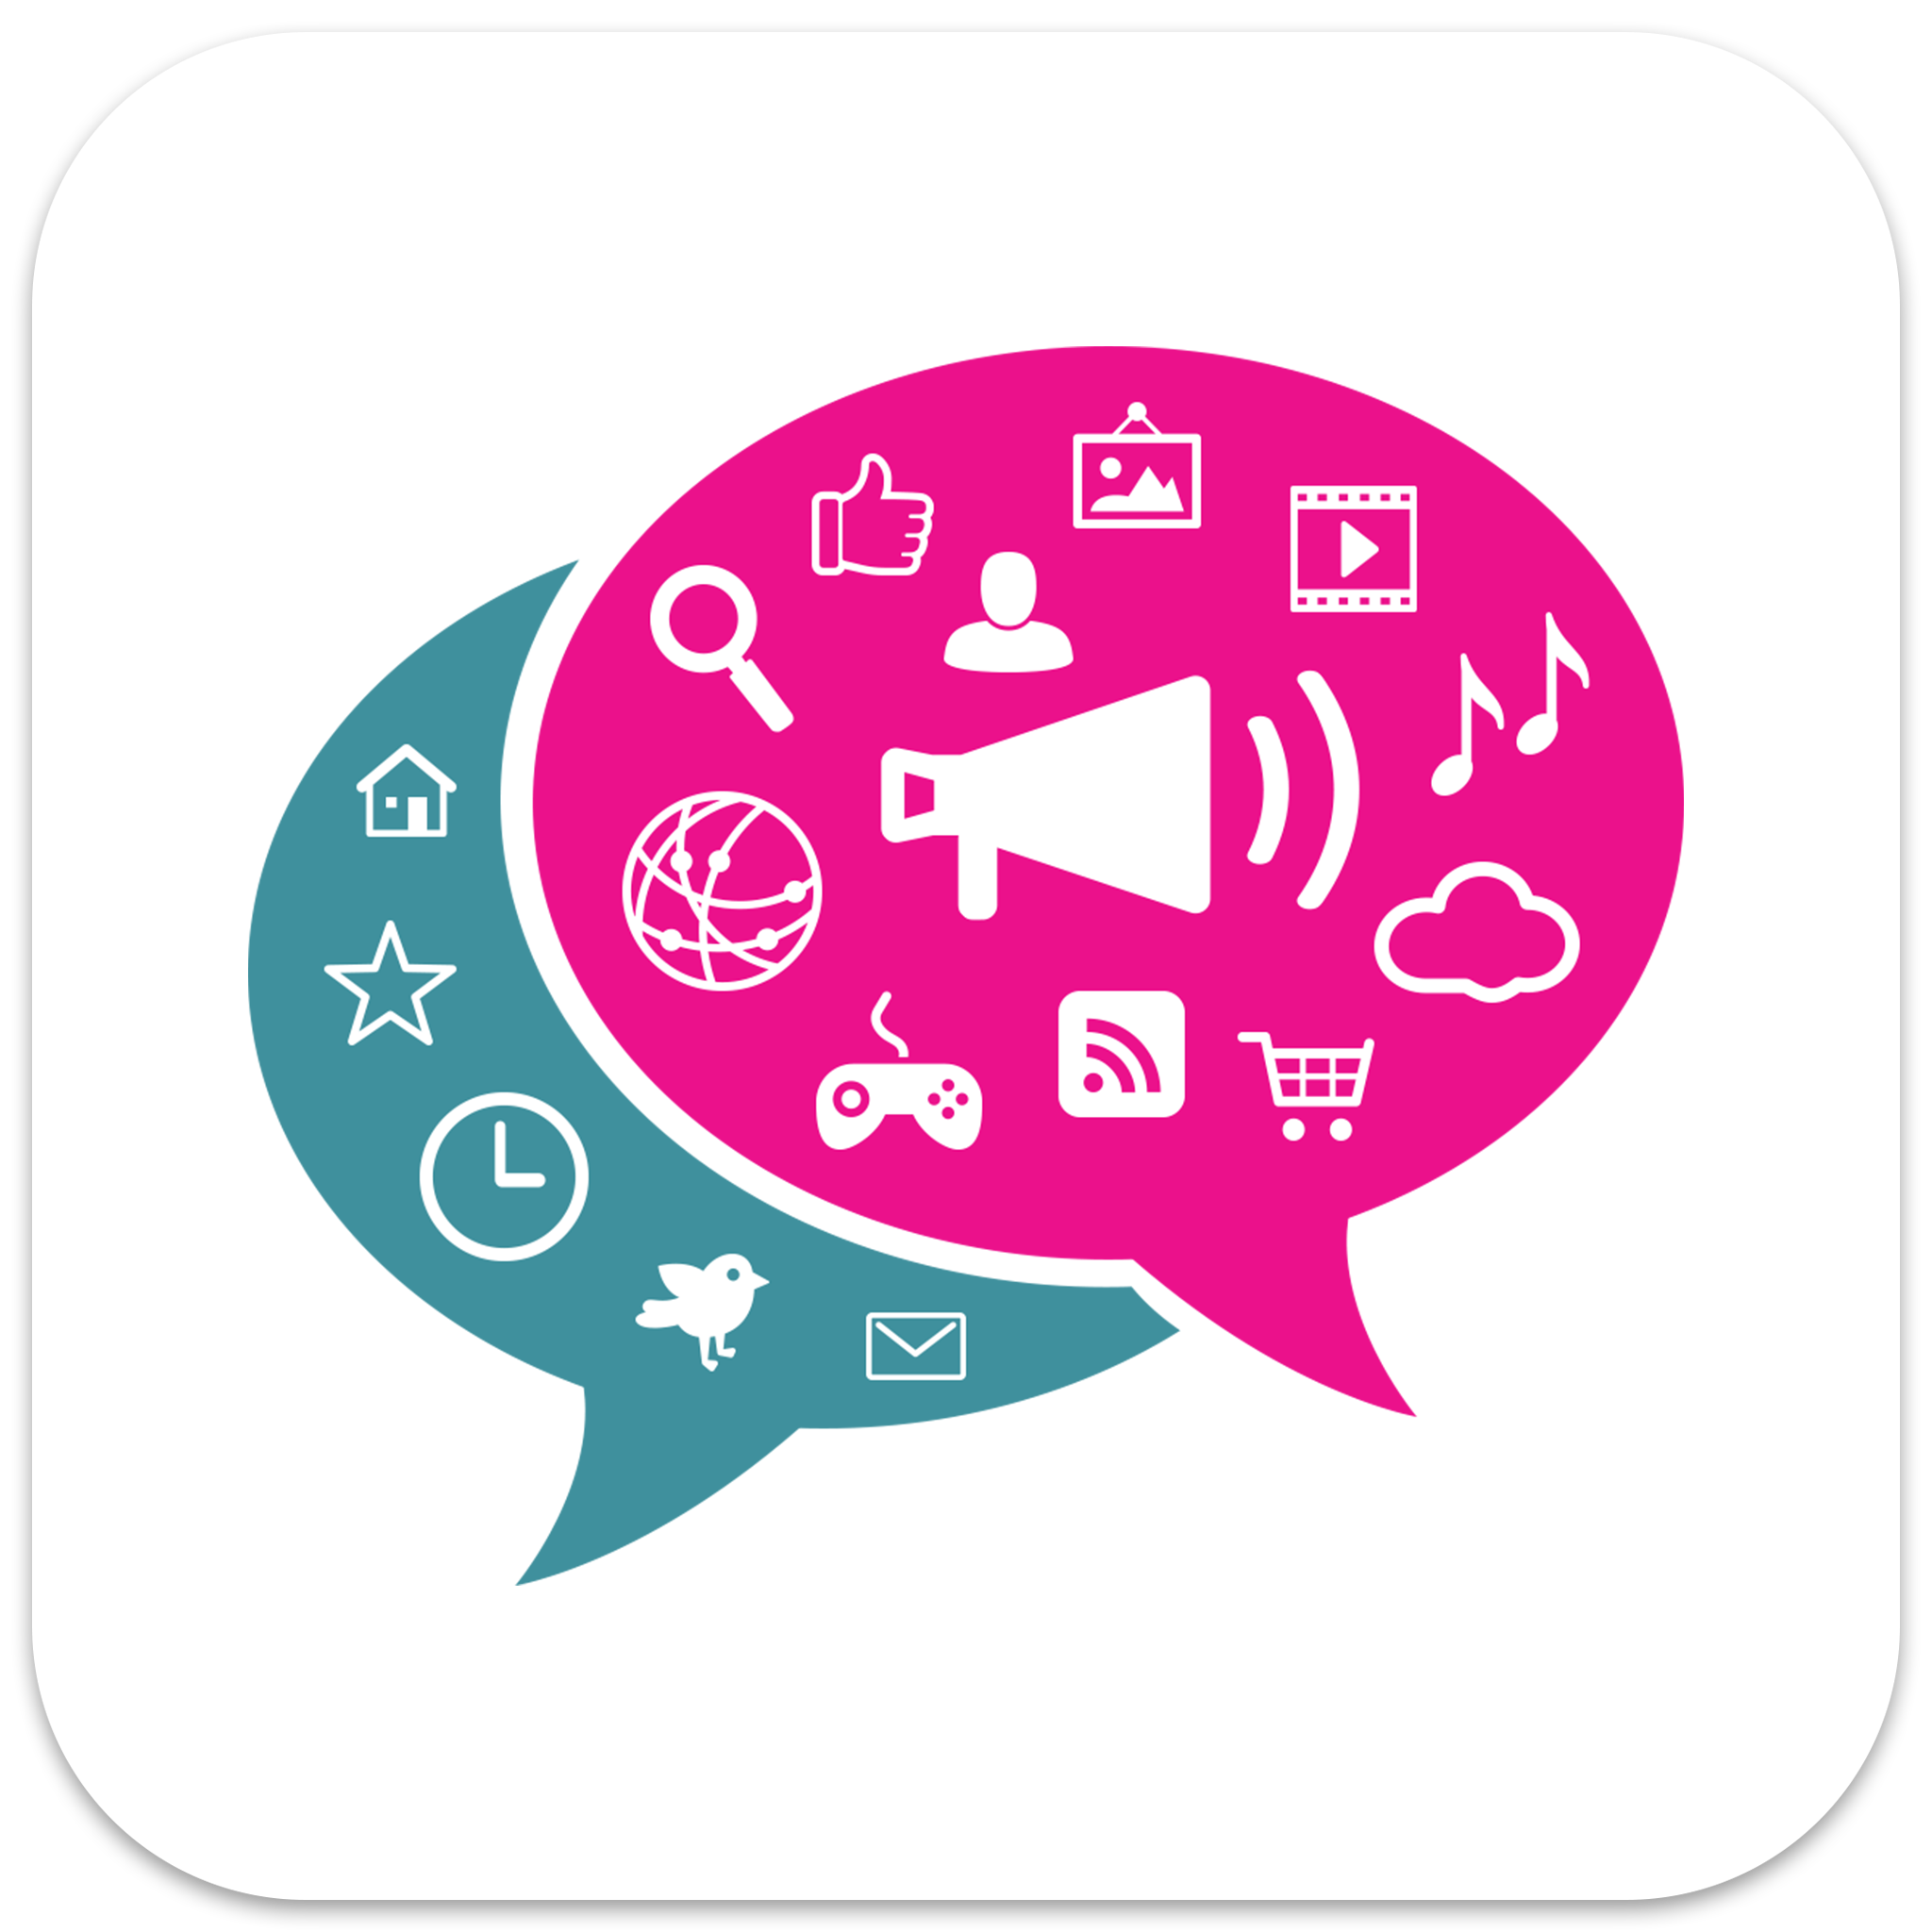 Turning Monologues into Dialogues with the T-Systems Mobile App